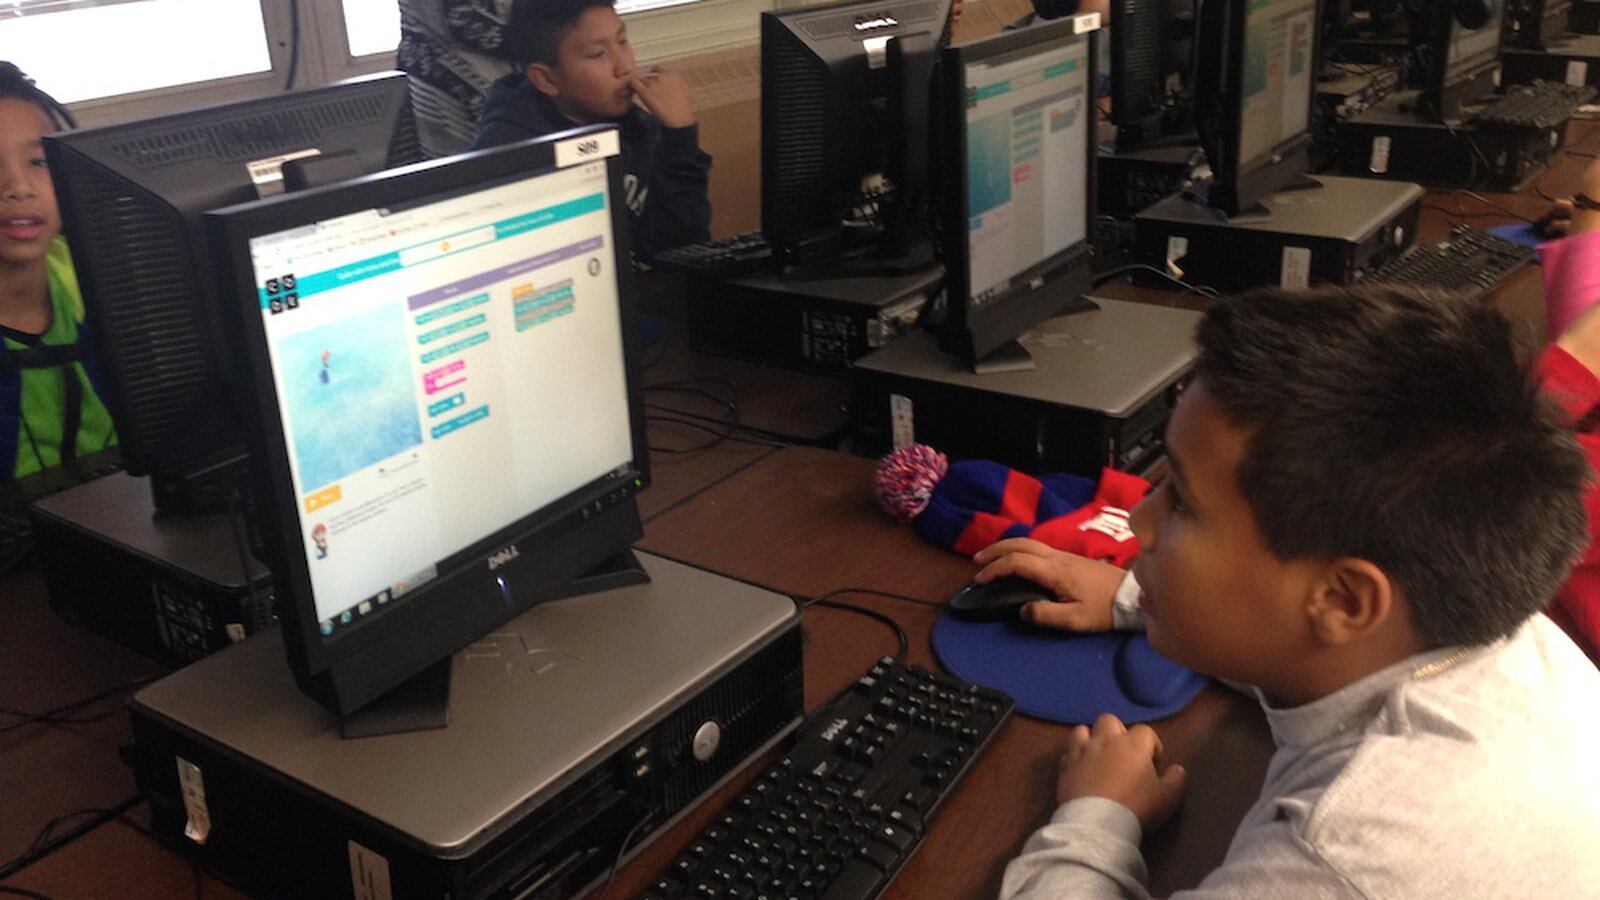 A sixth grade class at M.S. 88 participate in an "Hour of Coding" event organized by the computer science advocacy group Code.org. The city is planning to train 100 teachers on new computer science curriculum by 2017.